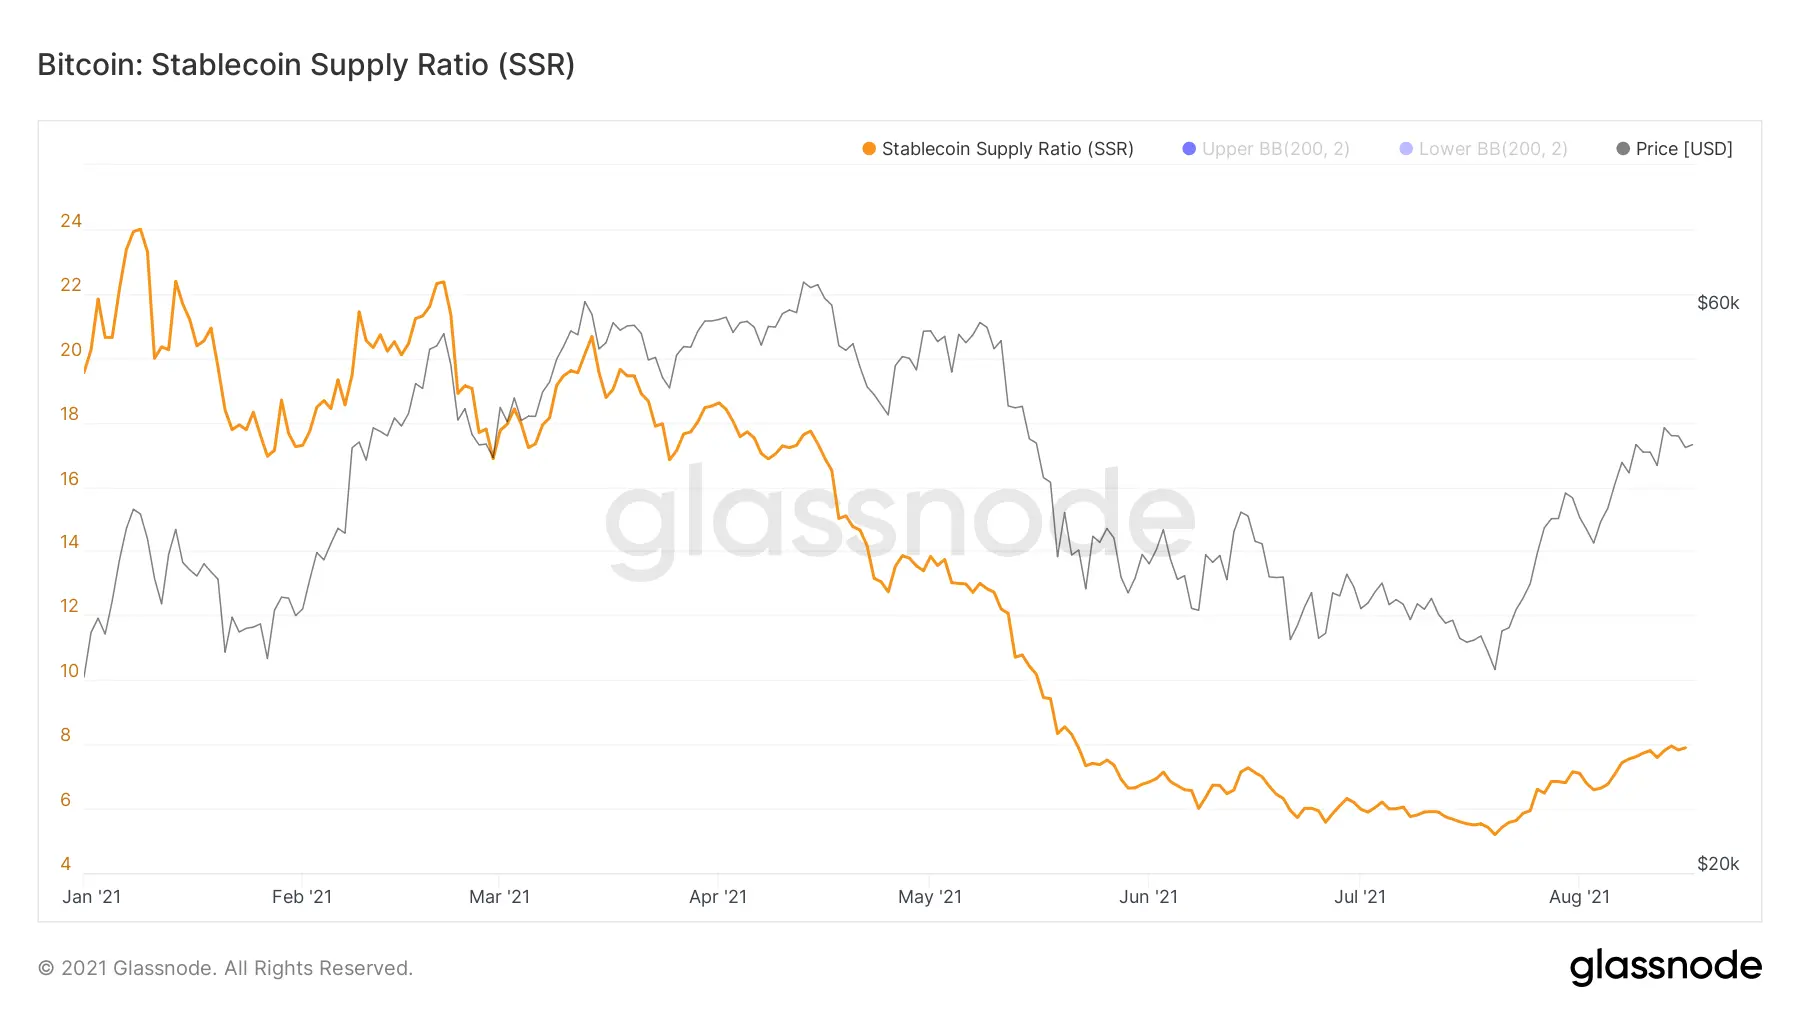 Stablecoin Supply Ratio (SSR)